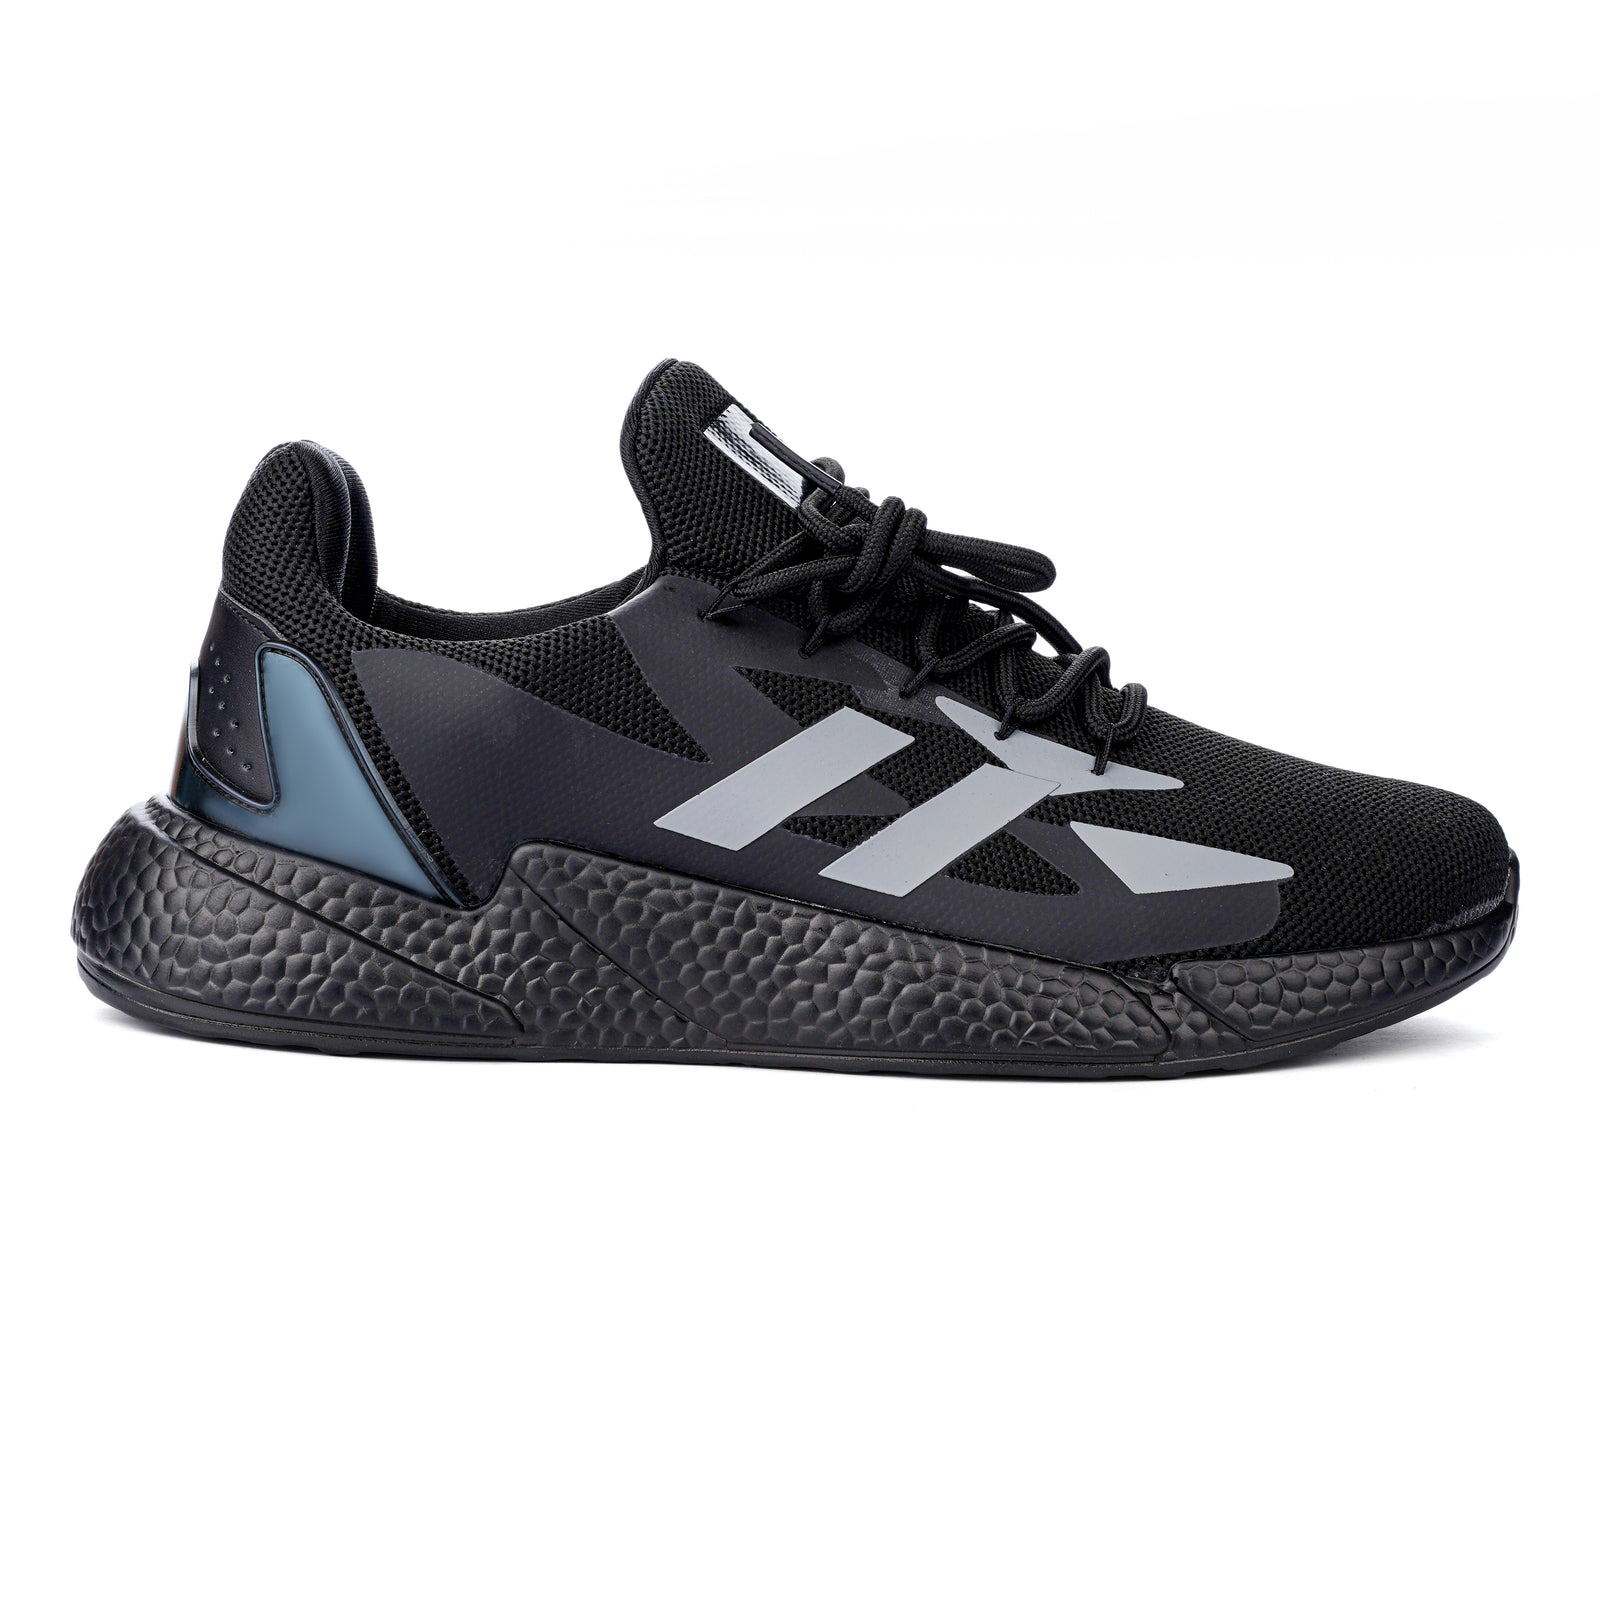 BLACK  Solid Mesh Lace Up Running Sport Shoes For Men